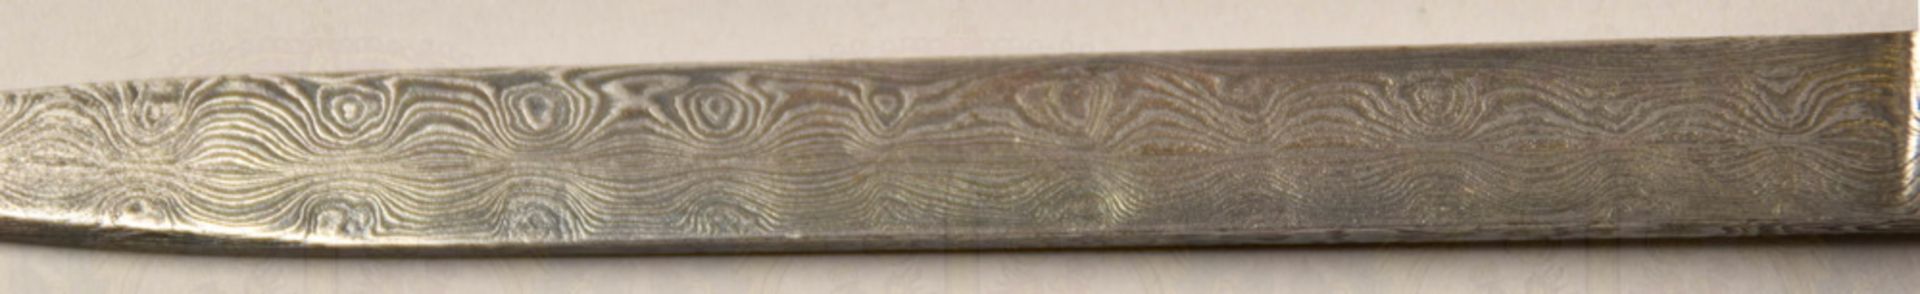 Miniature hunting knife with damask blade - Image 5 of 6